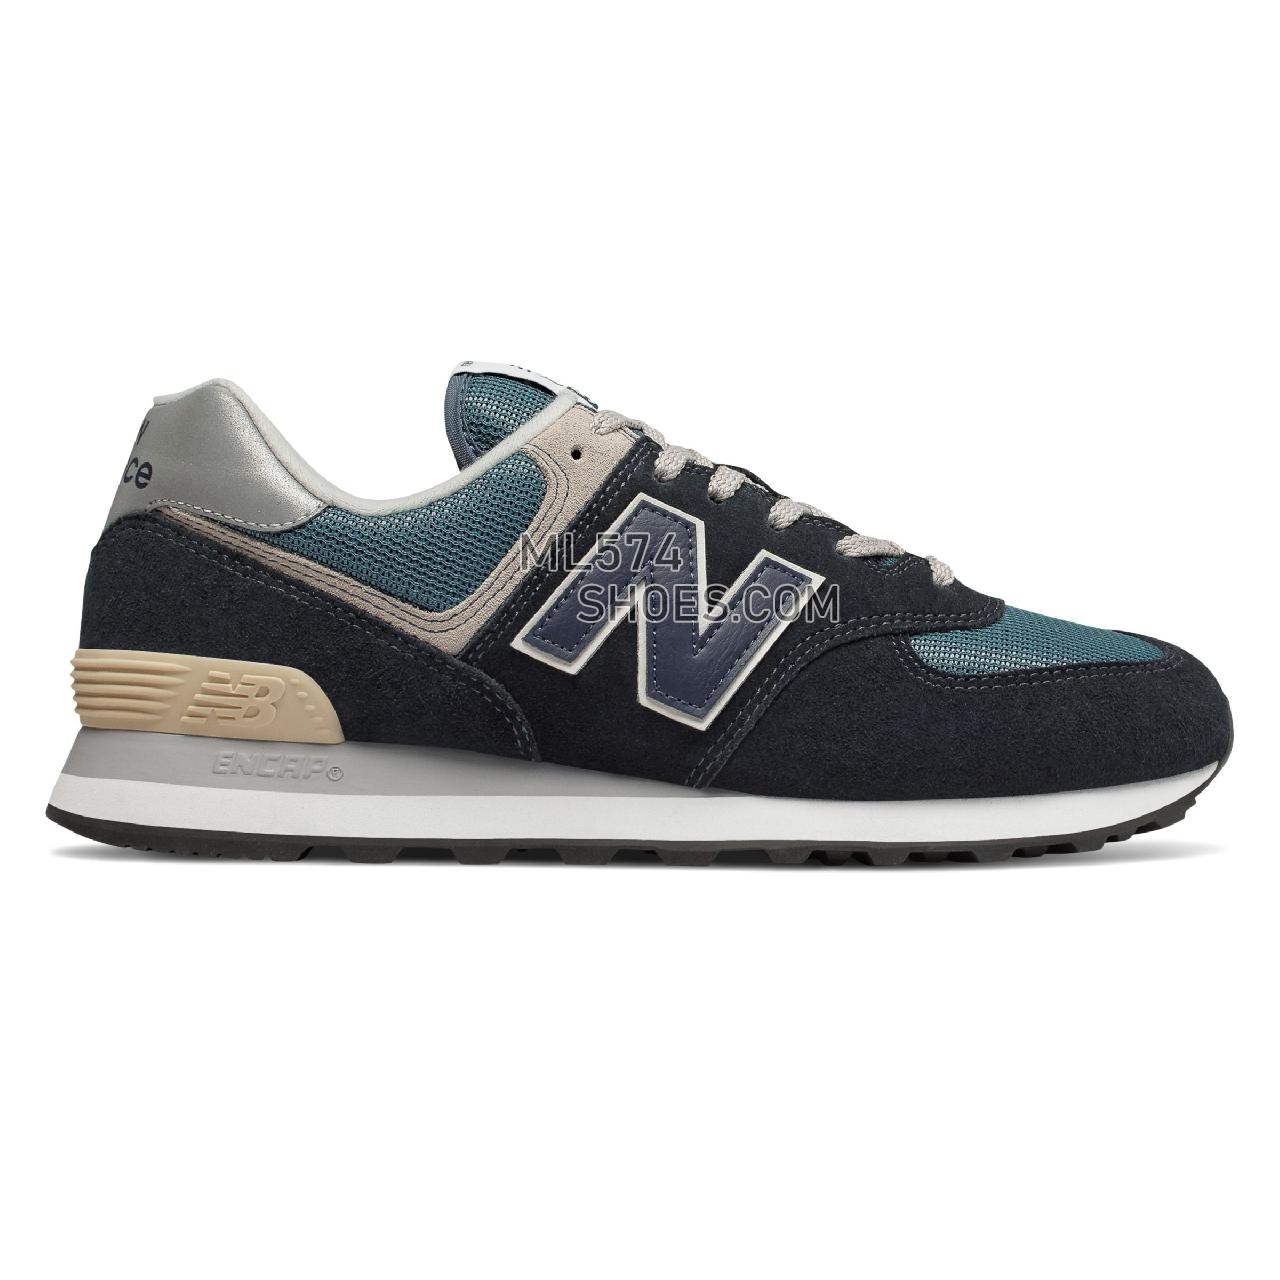 New Balance 574 - Men's Classic Sneakers - Dark Navy with Marred Blue - ML574ESS